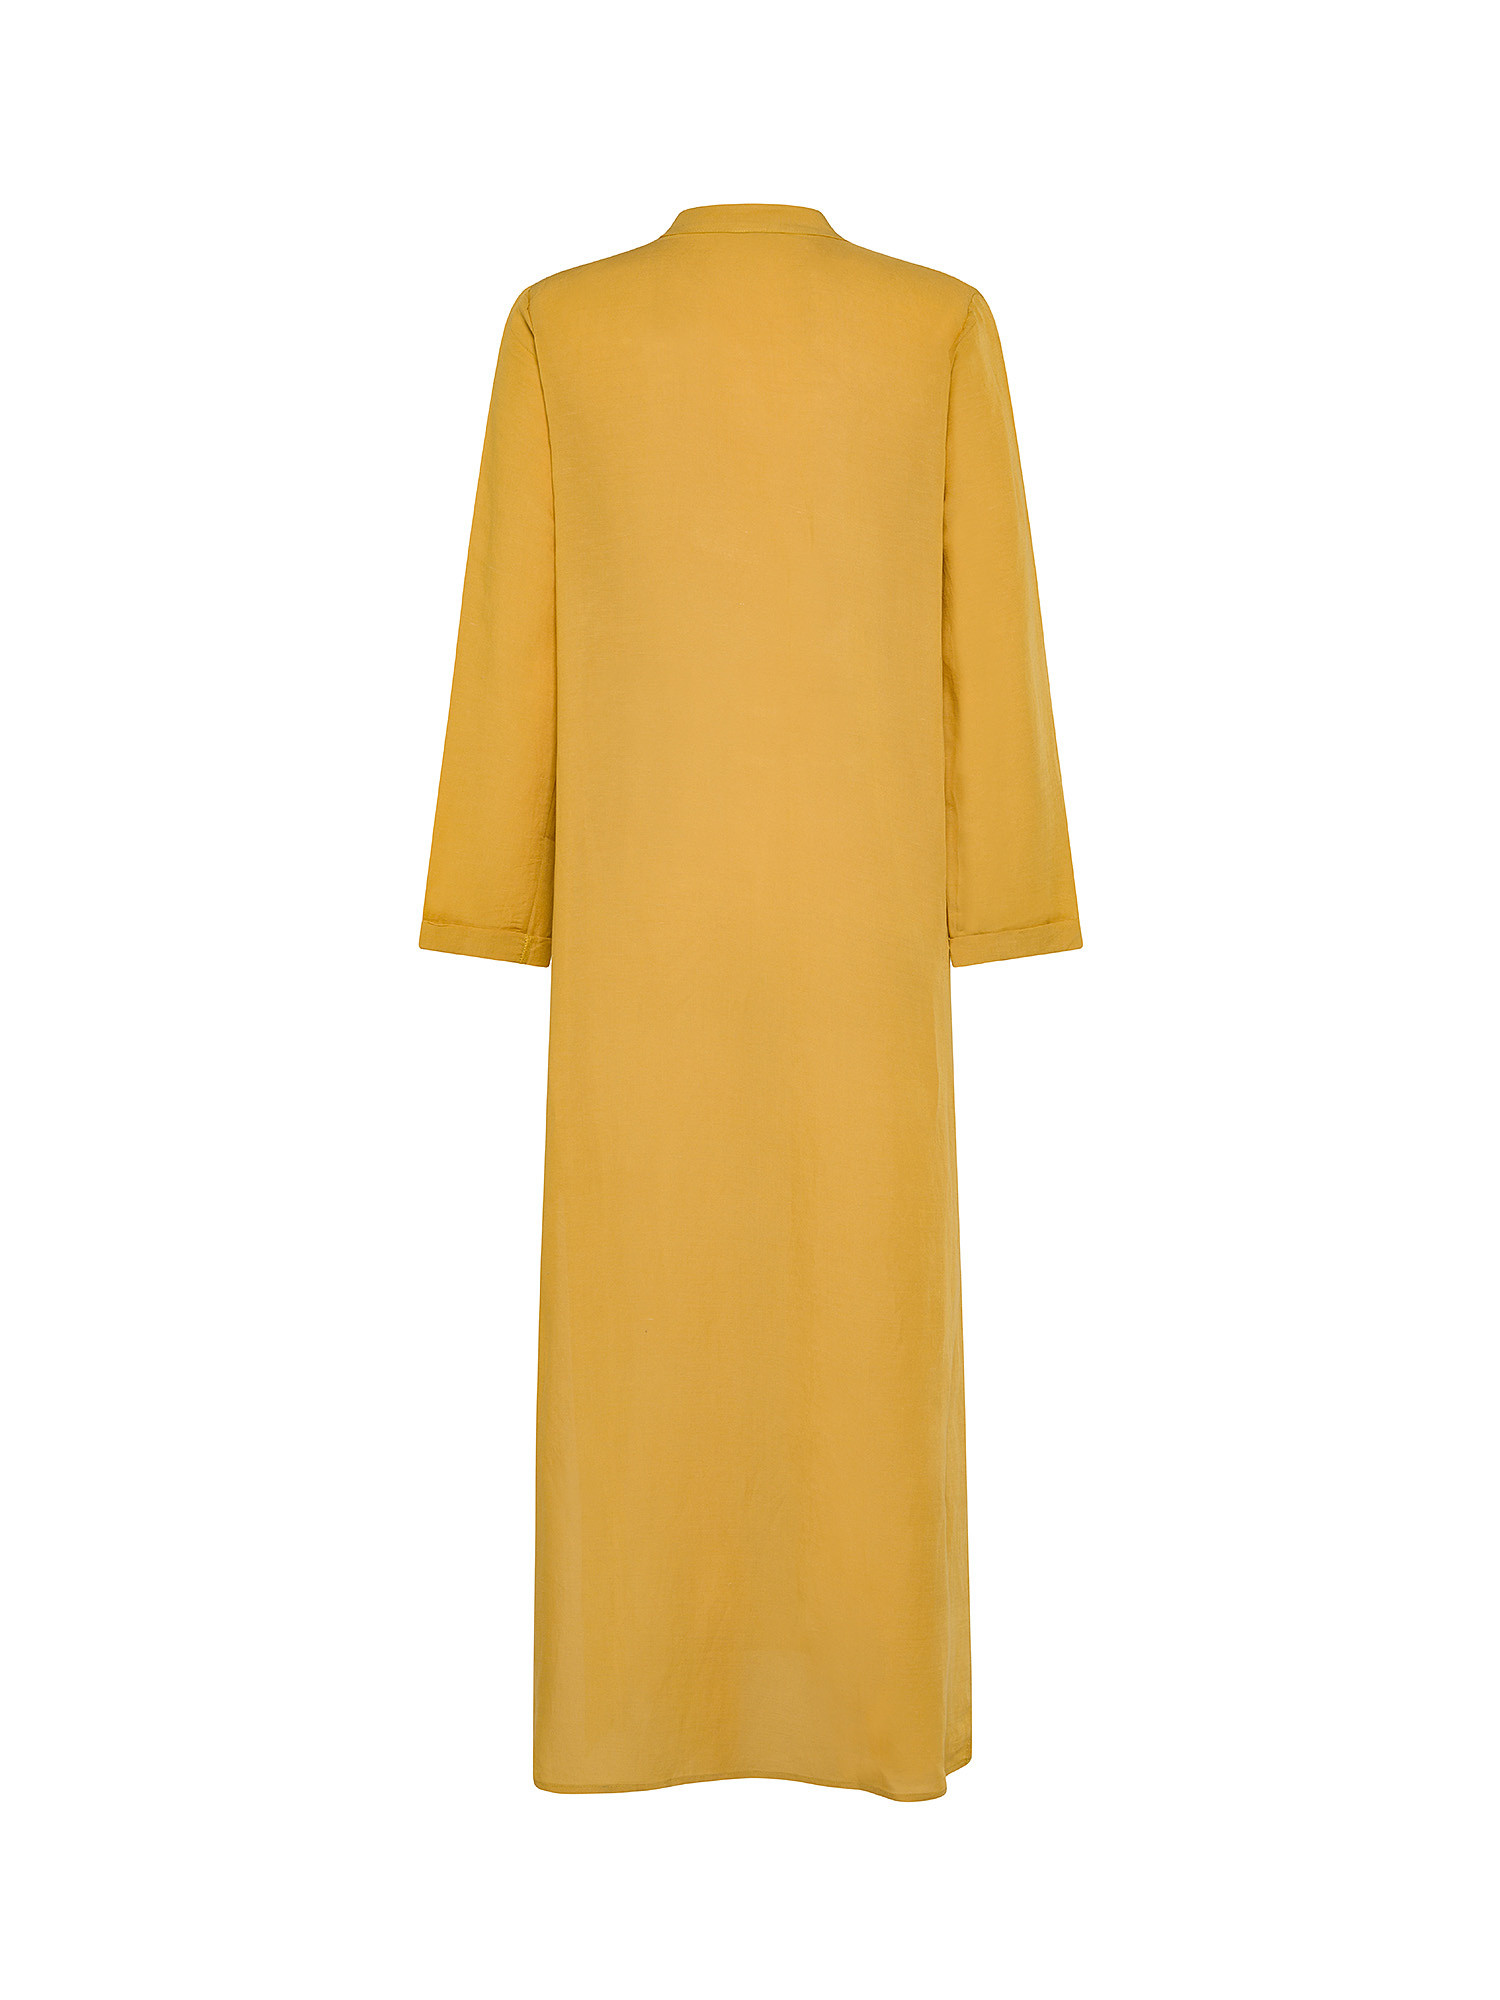 Solid color linen and viscose kaftan, Ocra Yellow, large image number 1